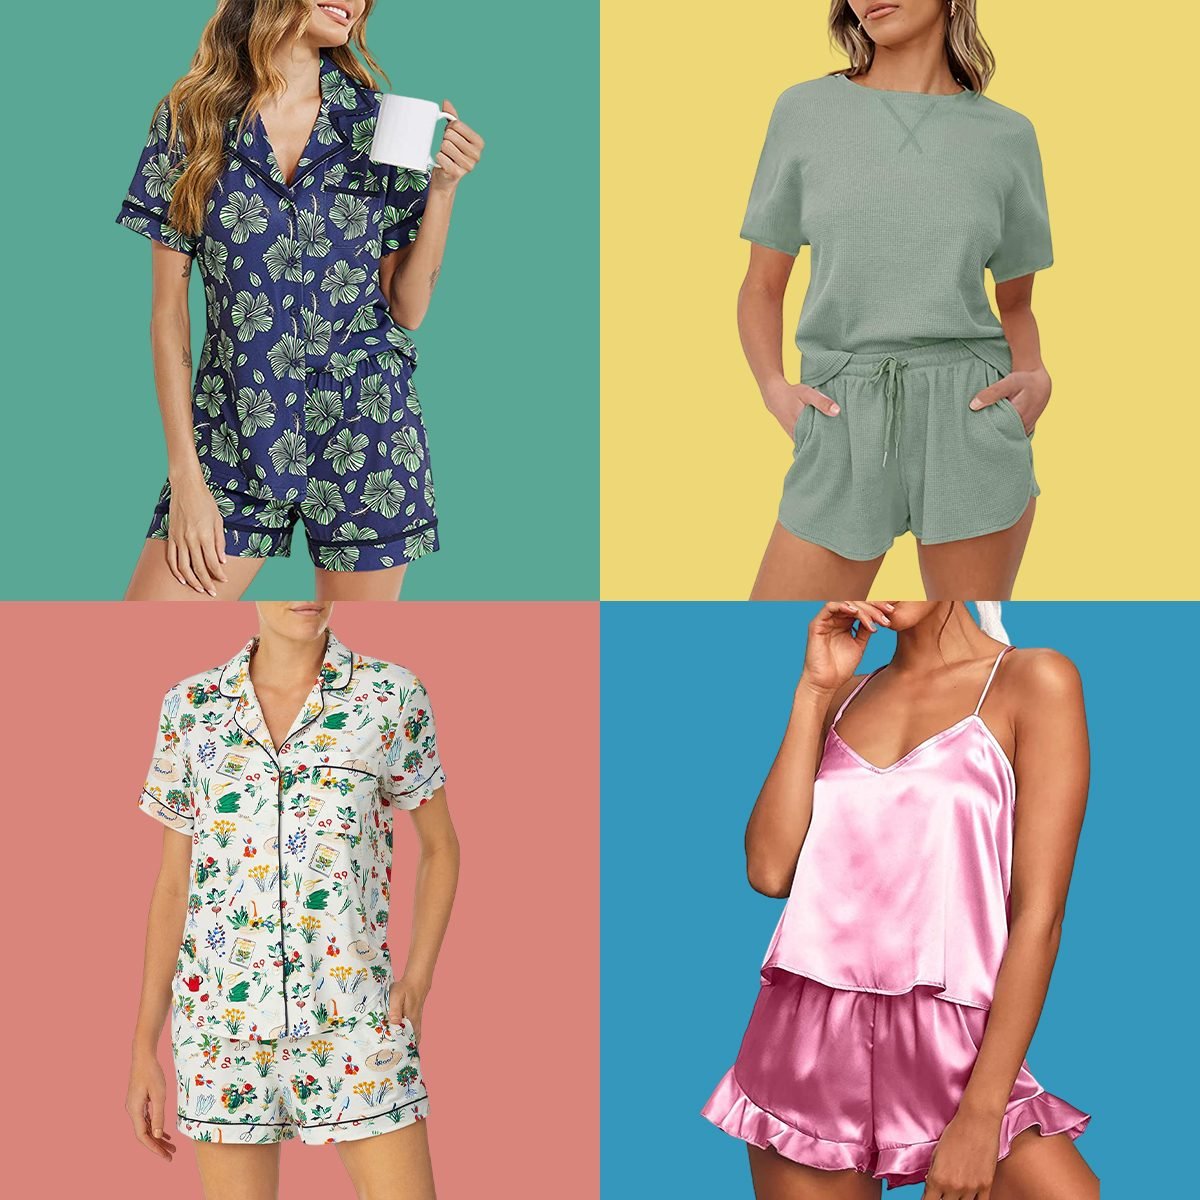 11 Pajama Short Sets To Keep You Cool And Comfortable All Night Long